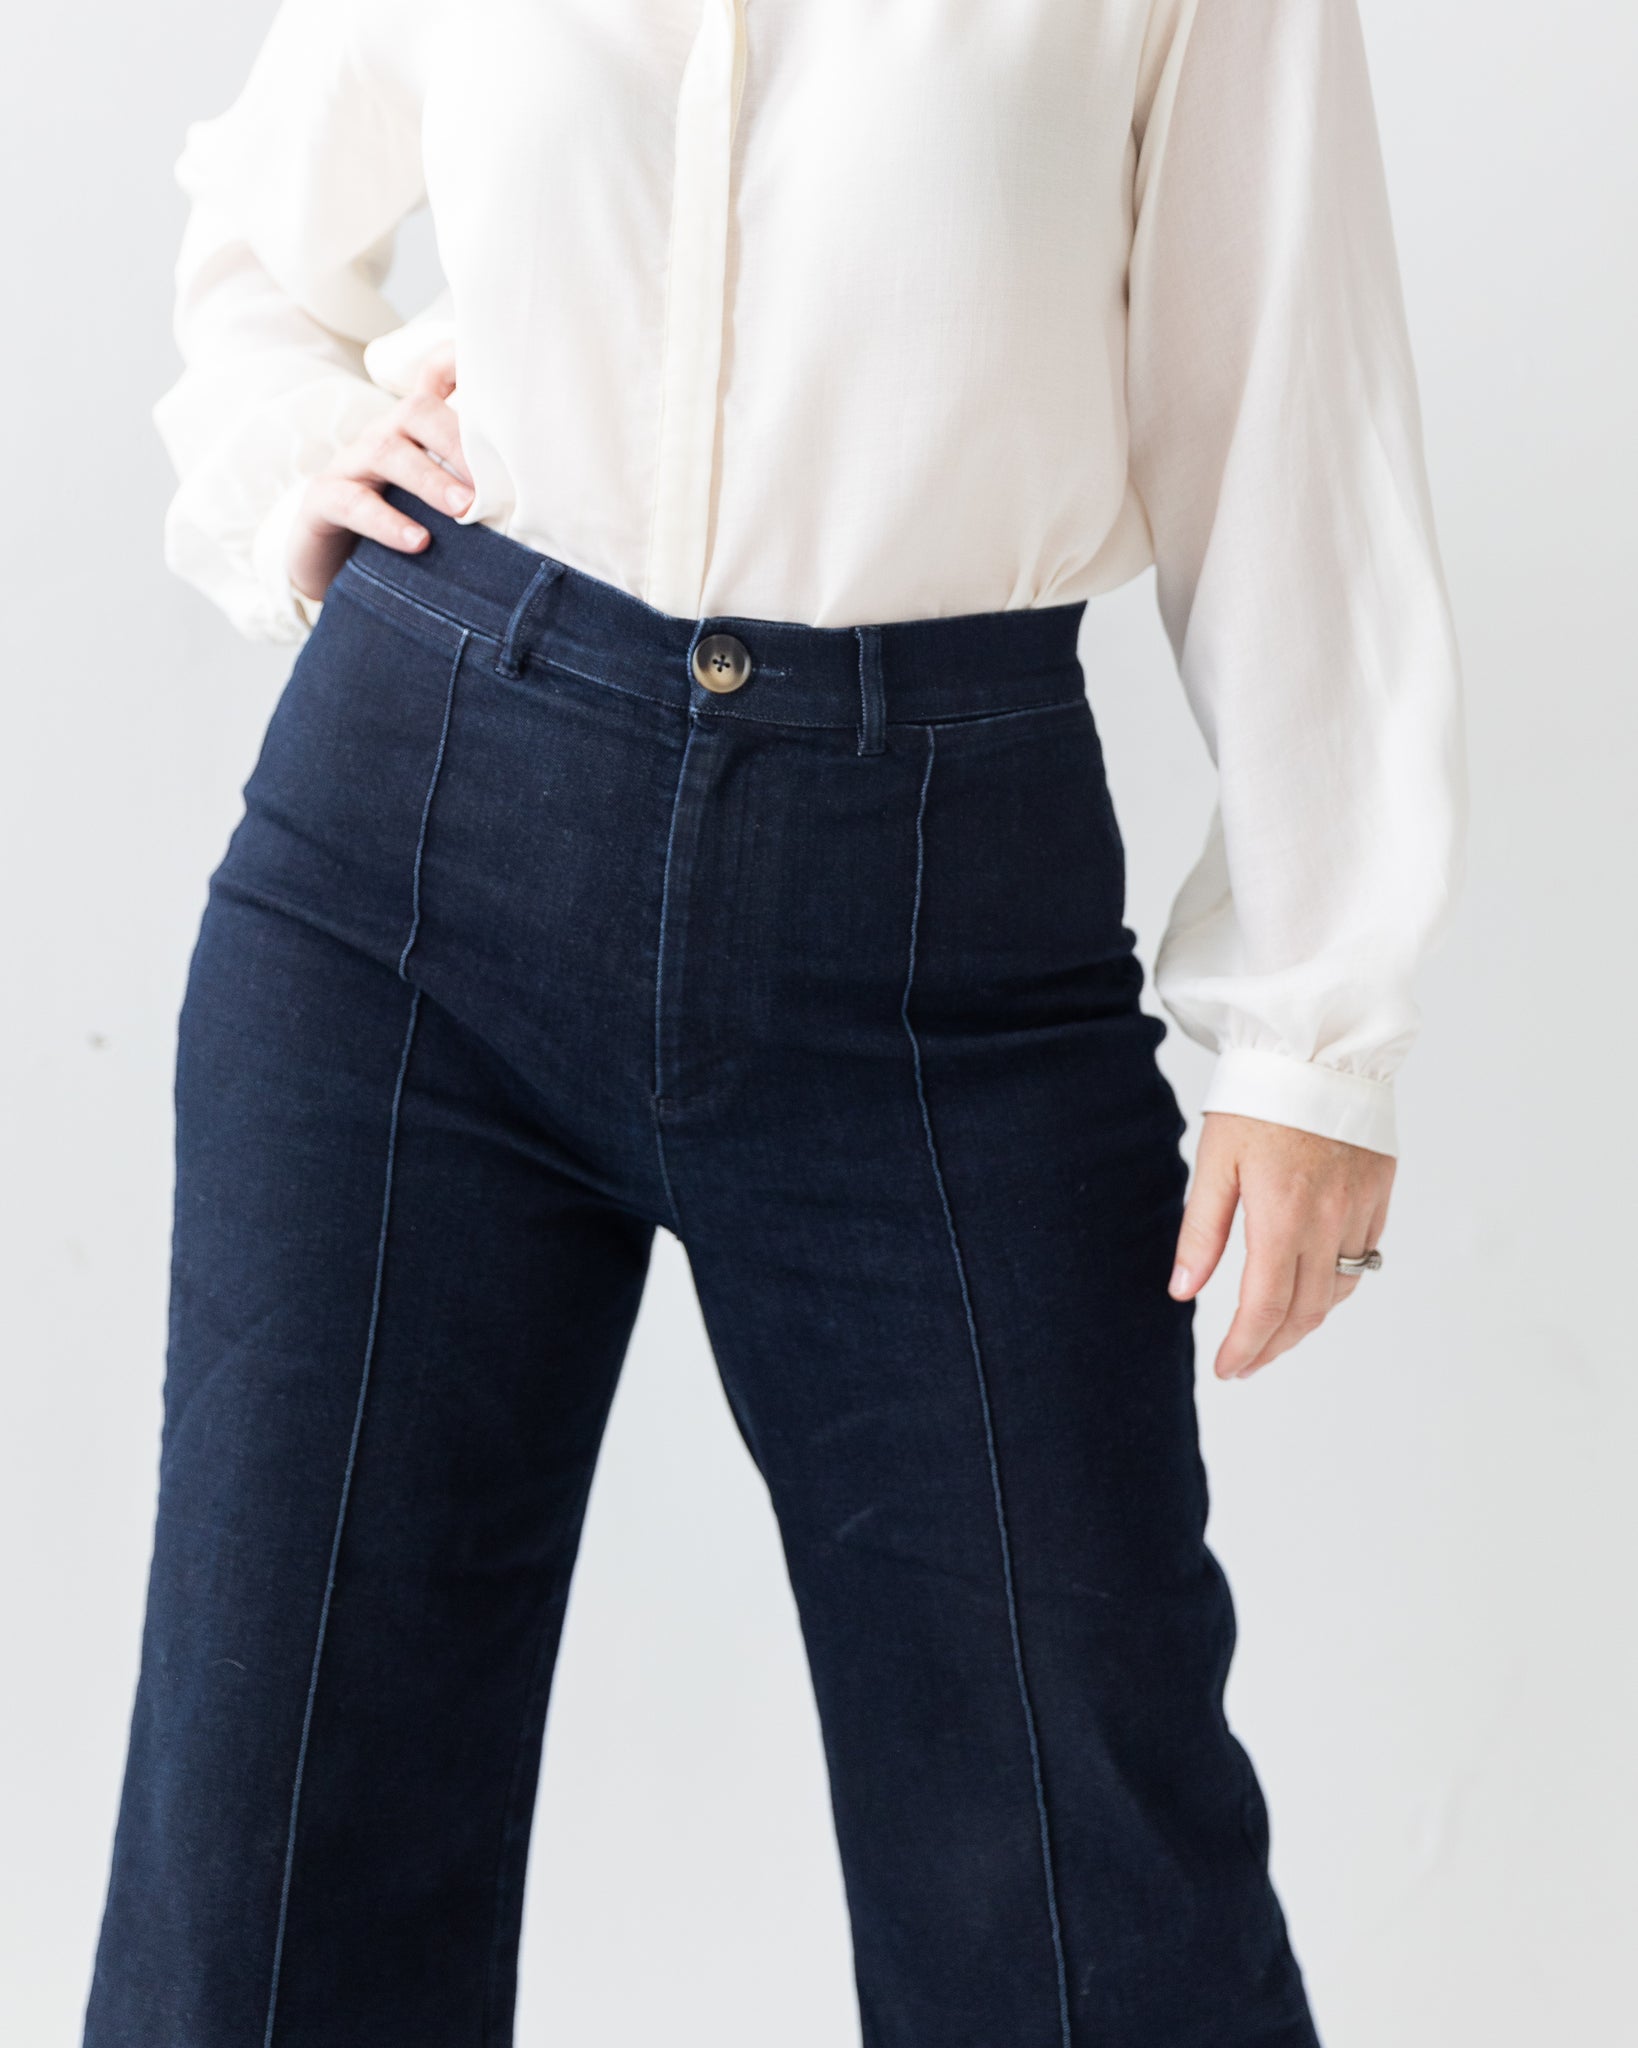 The Sailor Pant – For Now